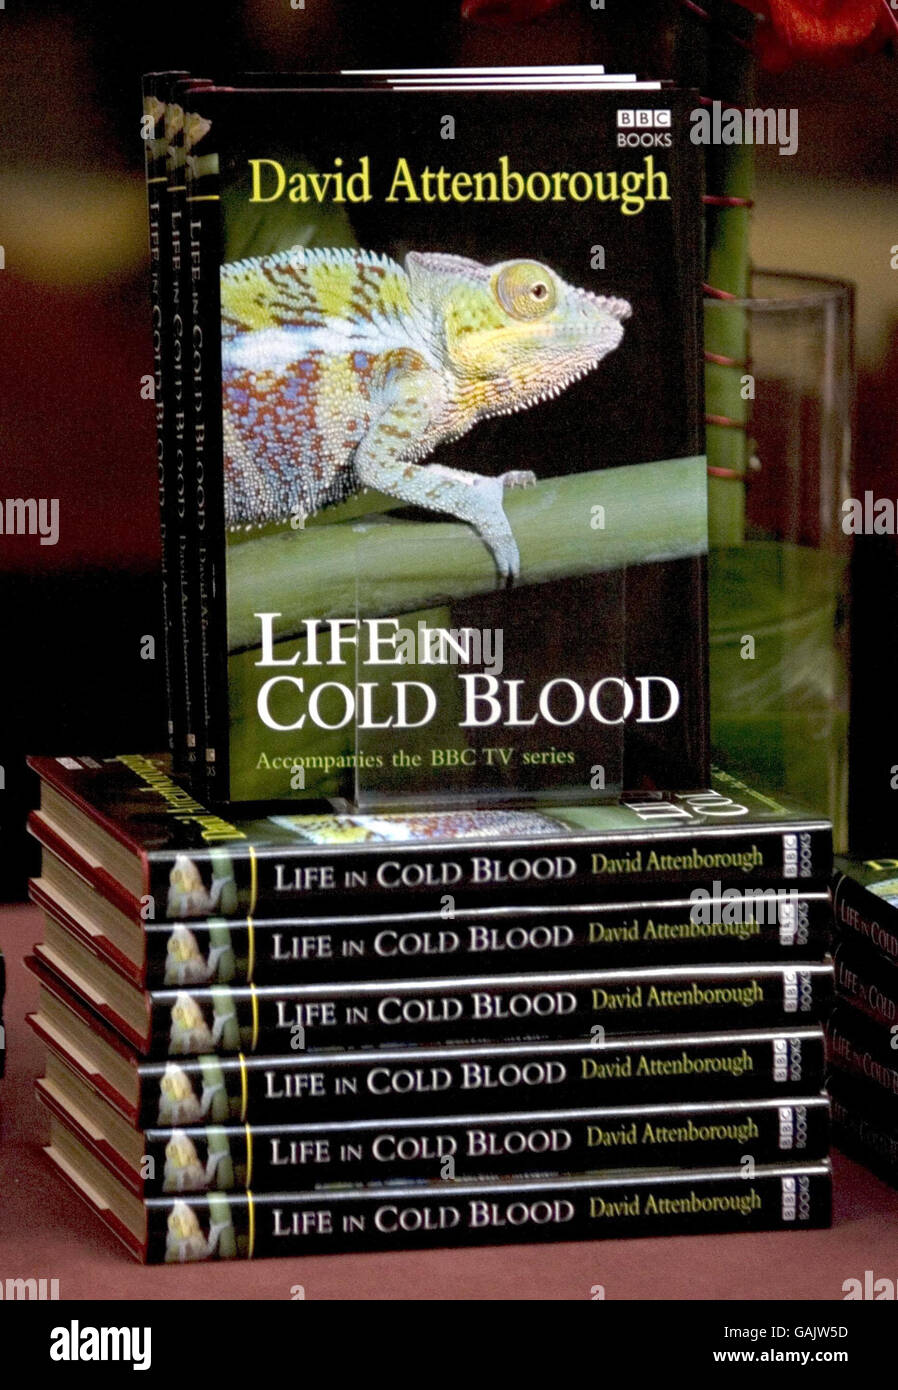 Copies of Life In Cold Blood, which accompanies the television programme of  the same name, at the Natural History Museum in central London Stock Photo  - Alamy